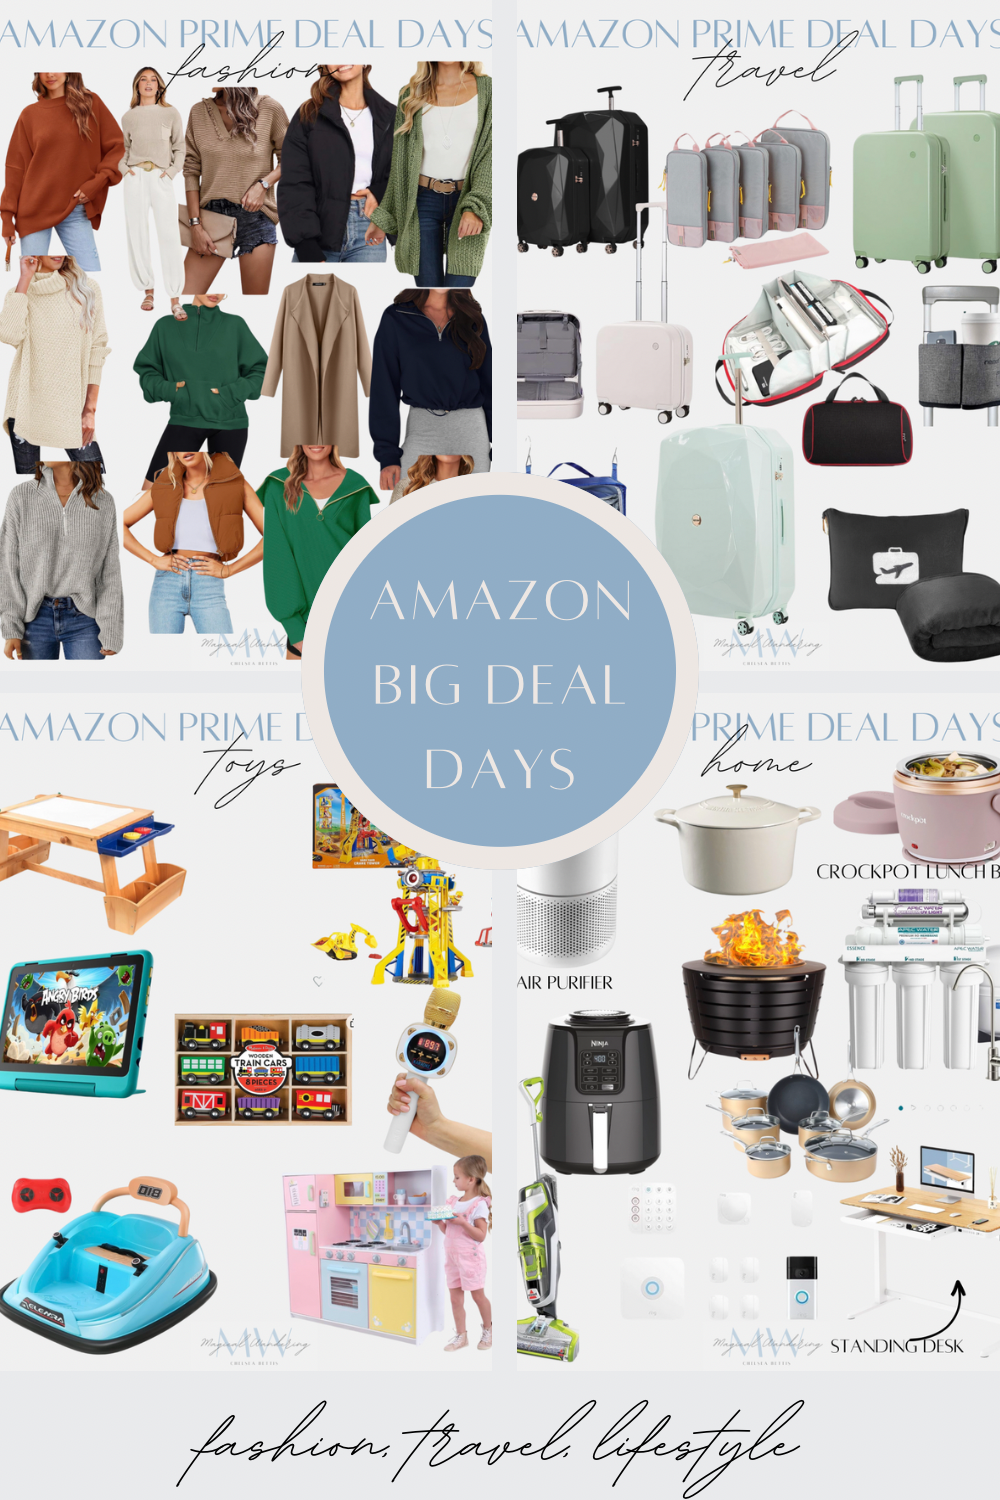 Big Deal Days - Prime Deals - House Of Hipsters